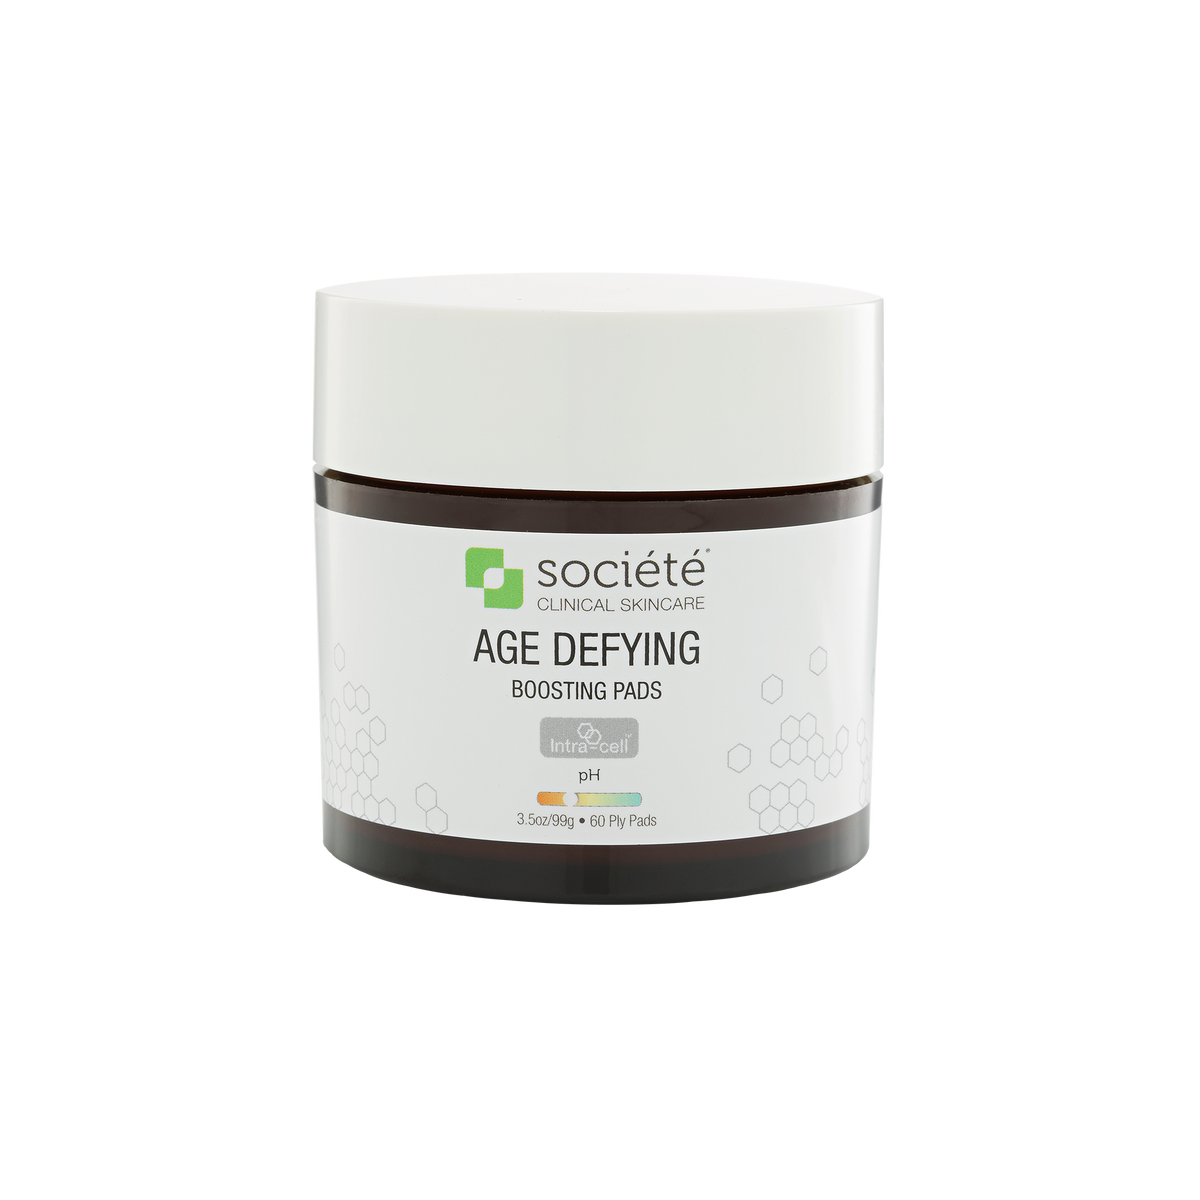 Societe - Age Defying Boosting Pads (99g)